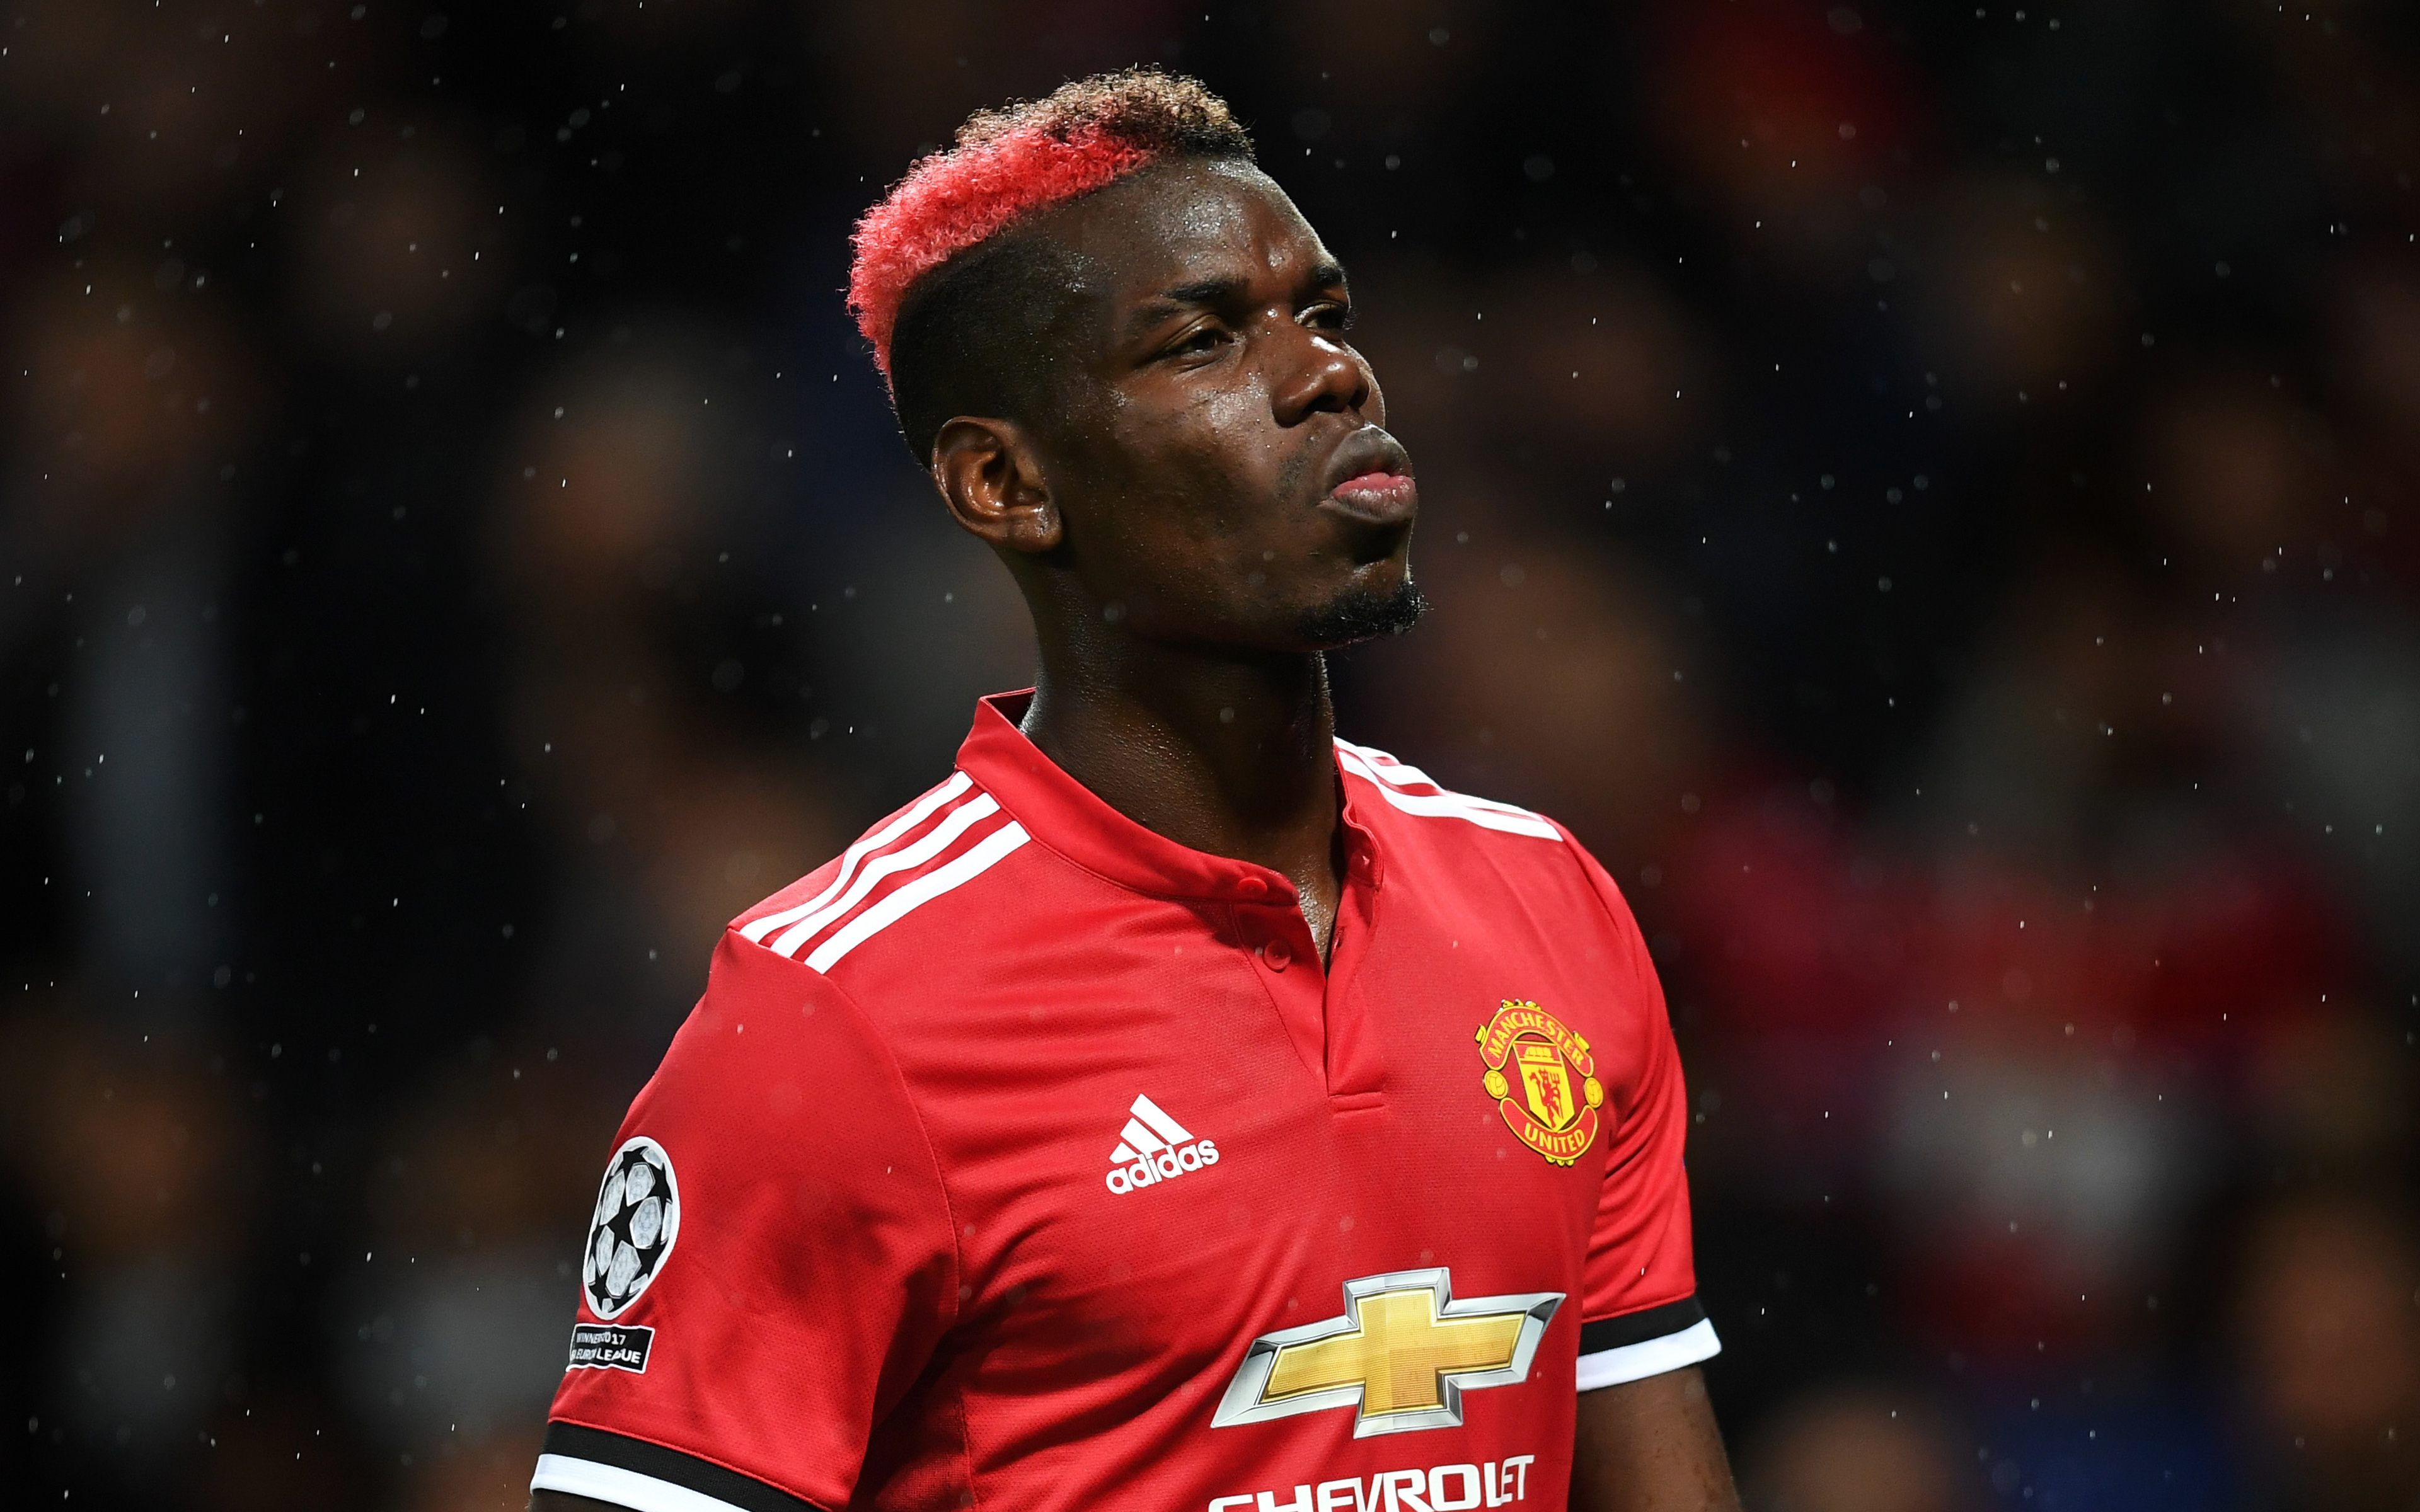 1920x10802021290 Paul Pogba 4k 1920x10802021290 Resolution Wallpaper, HD  Sports 4K Wallpapers, Images, Photos and Background - Wallpapers Den